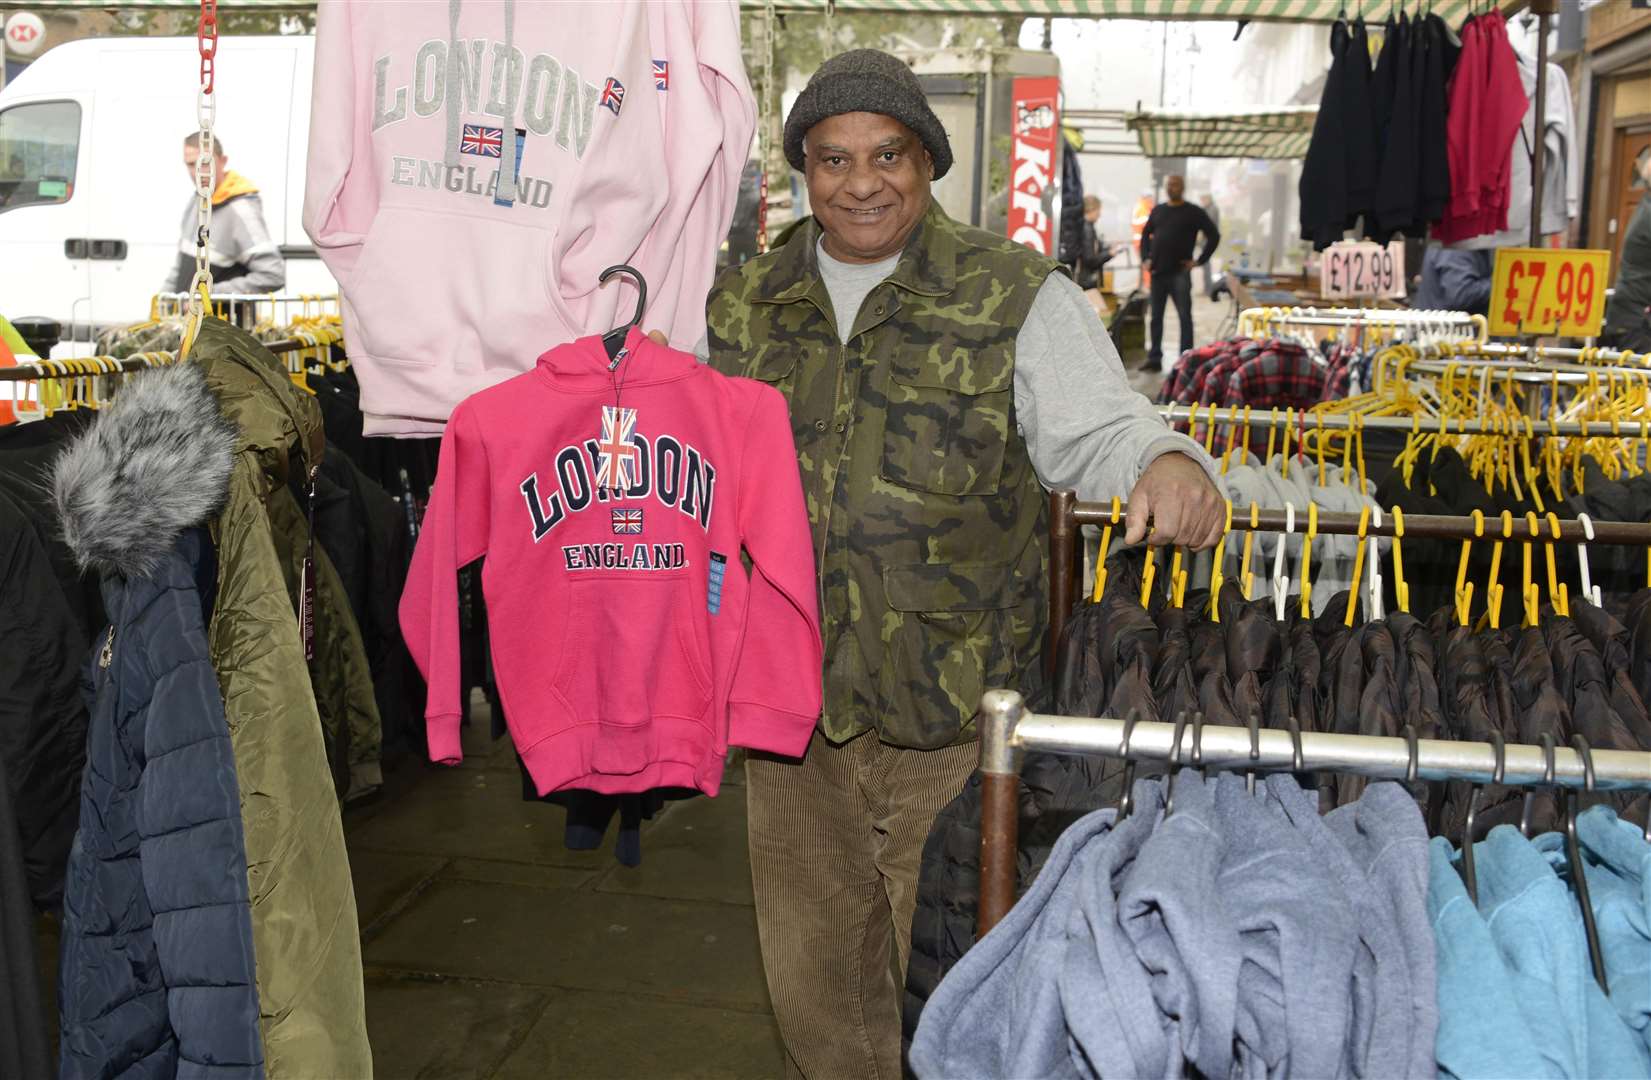 Manjit Singh has been selling clothes in markets around Ashford since 1987